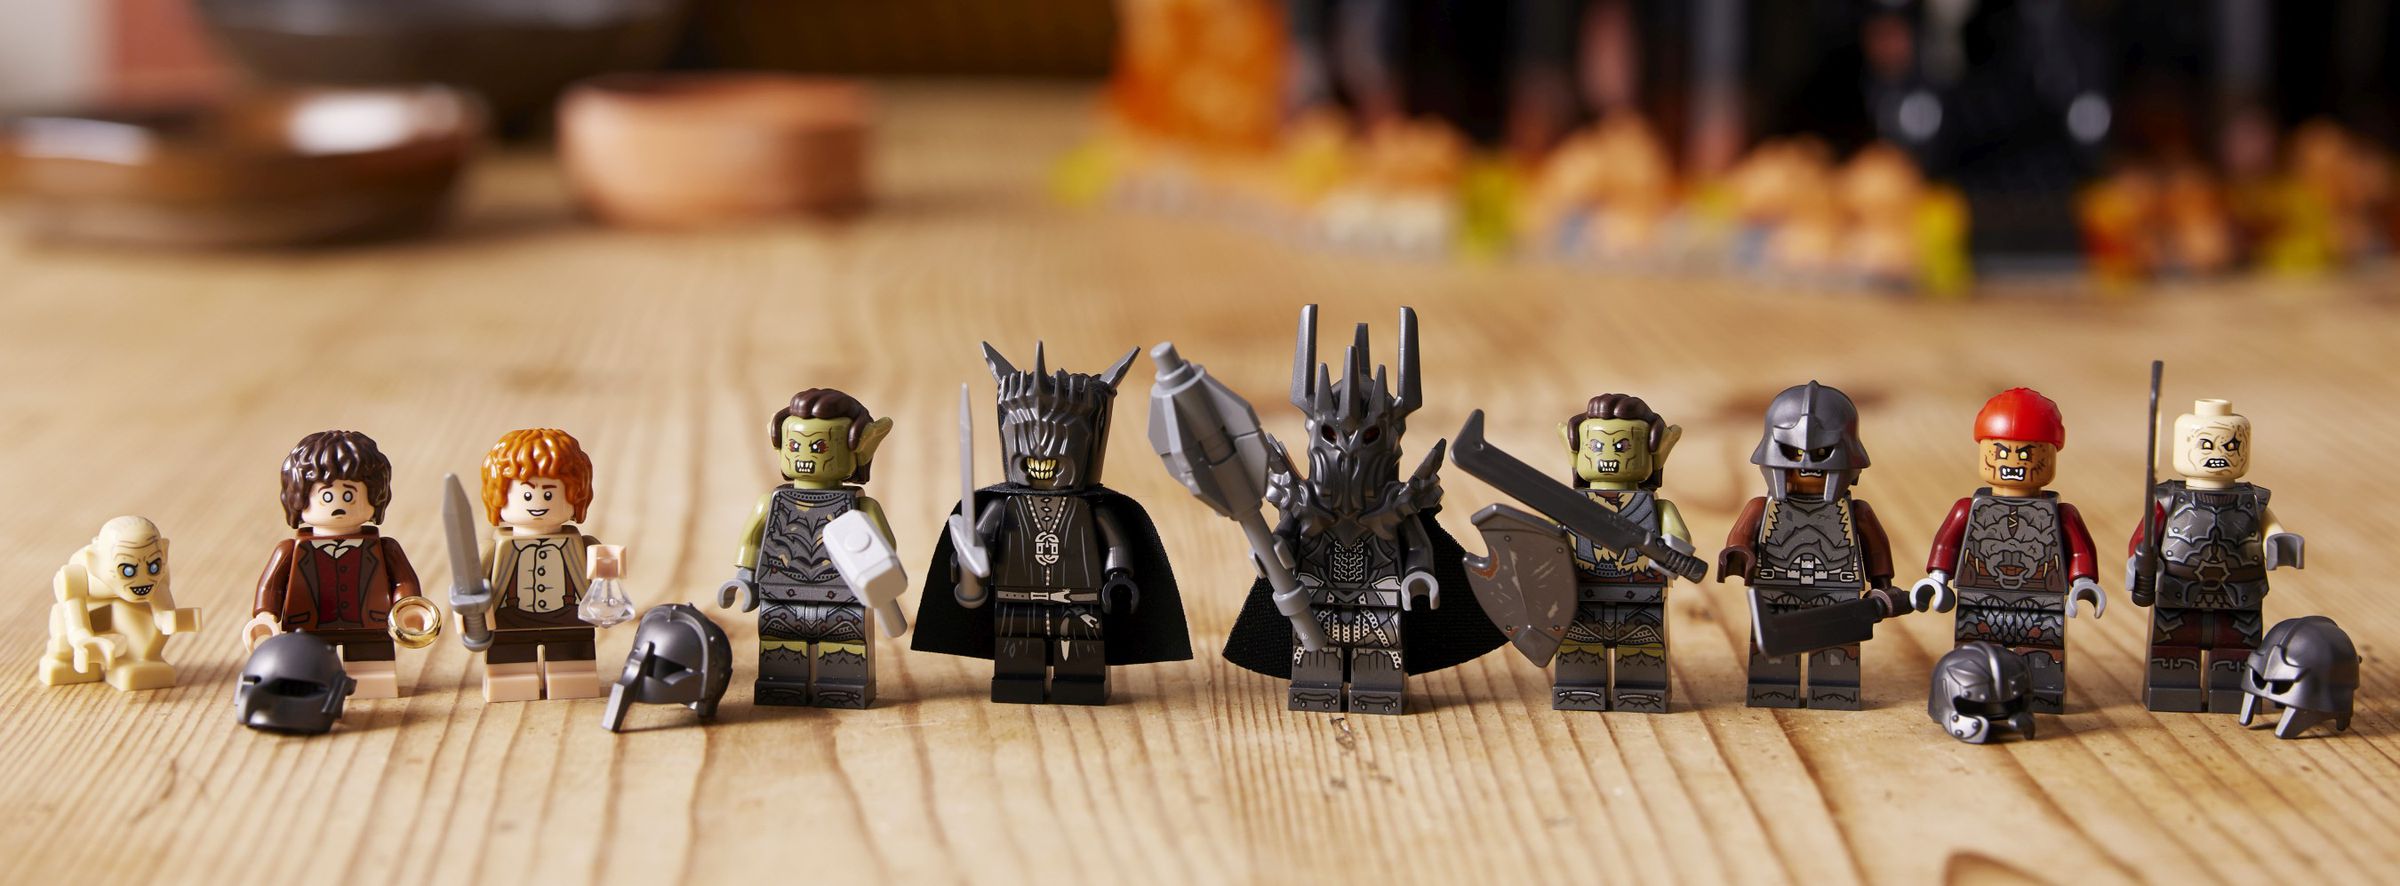 The set comes with minifigures of orcs, Frodo, Sauron, and more.